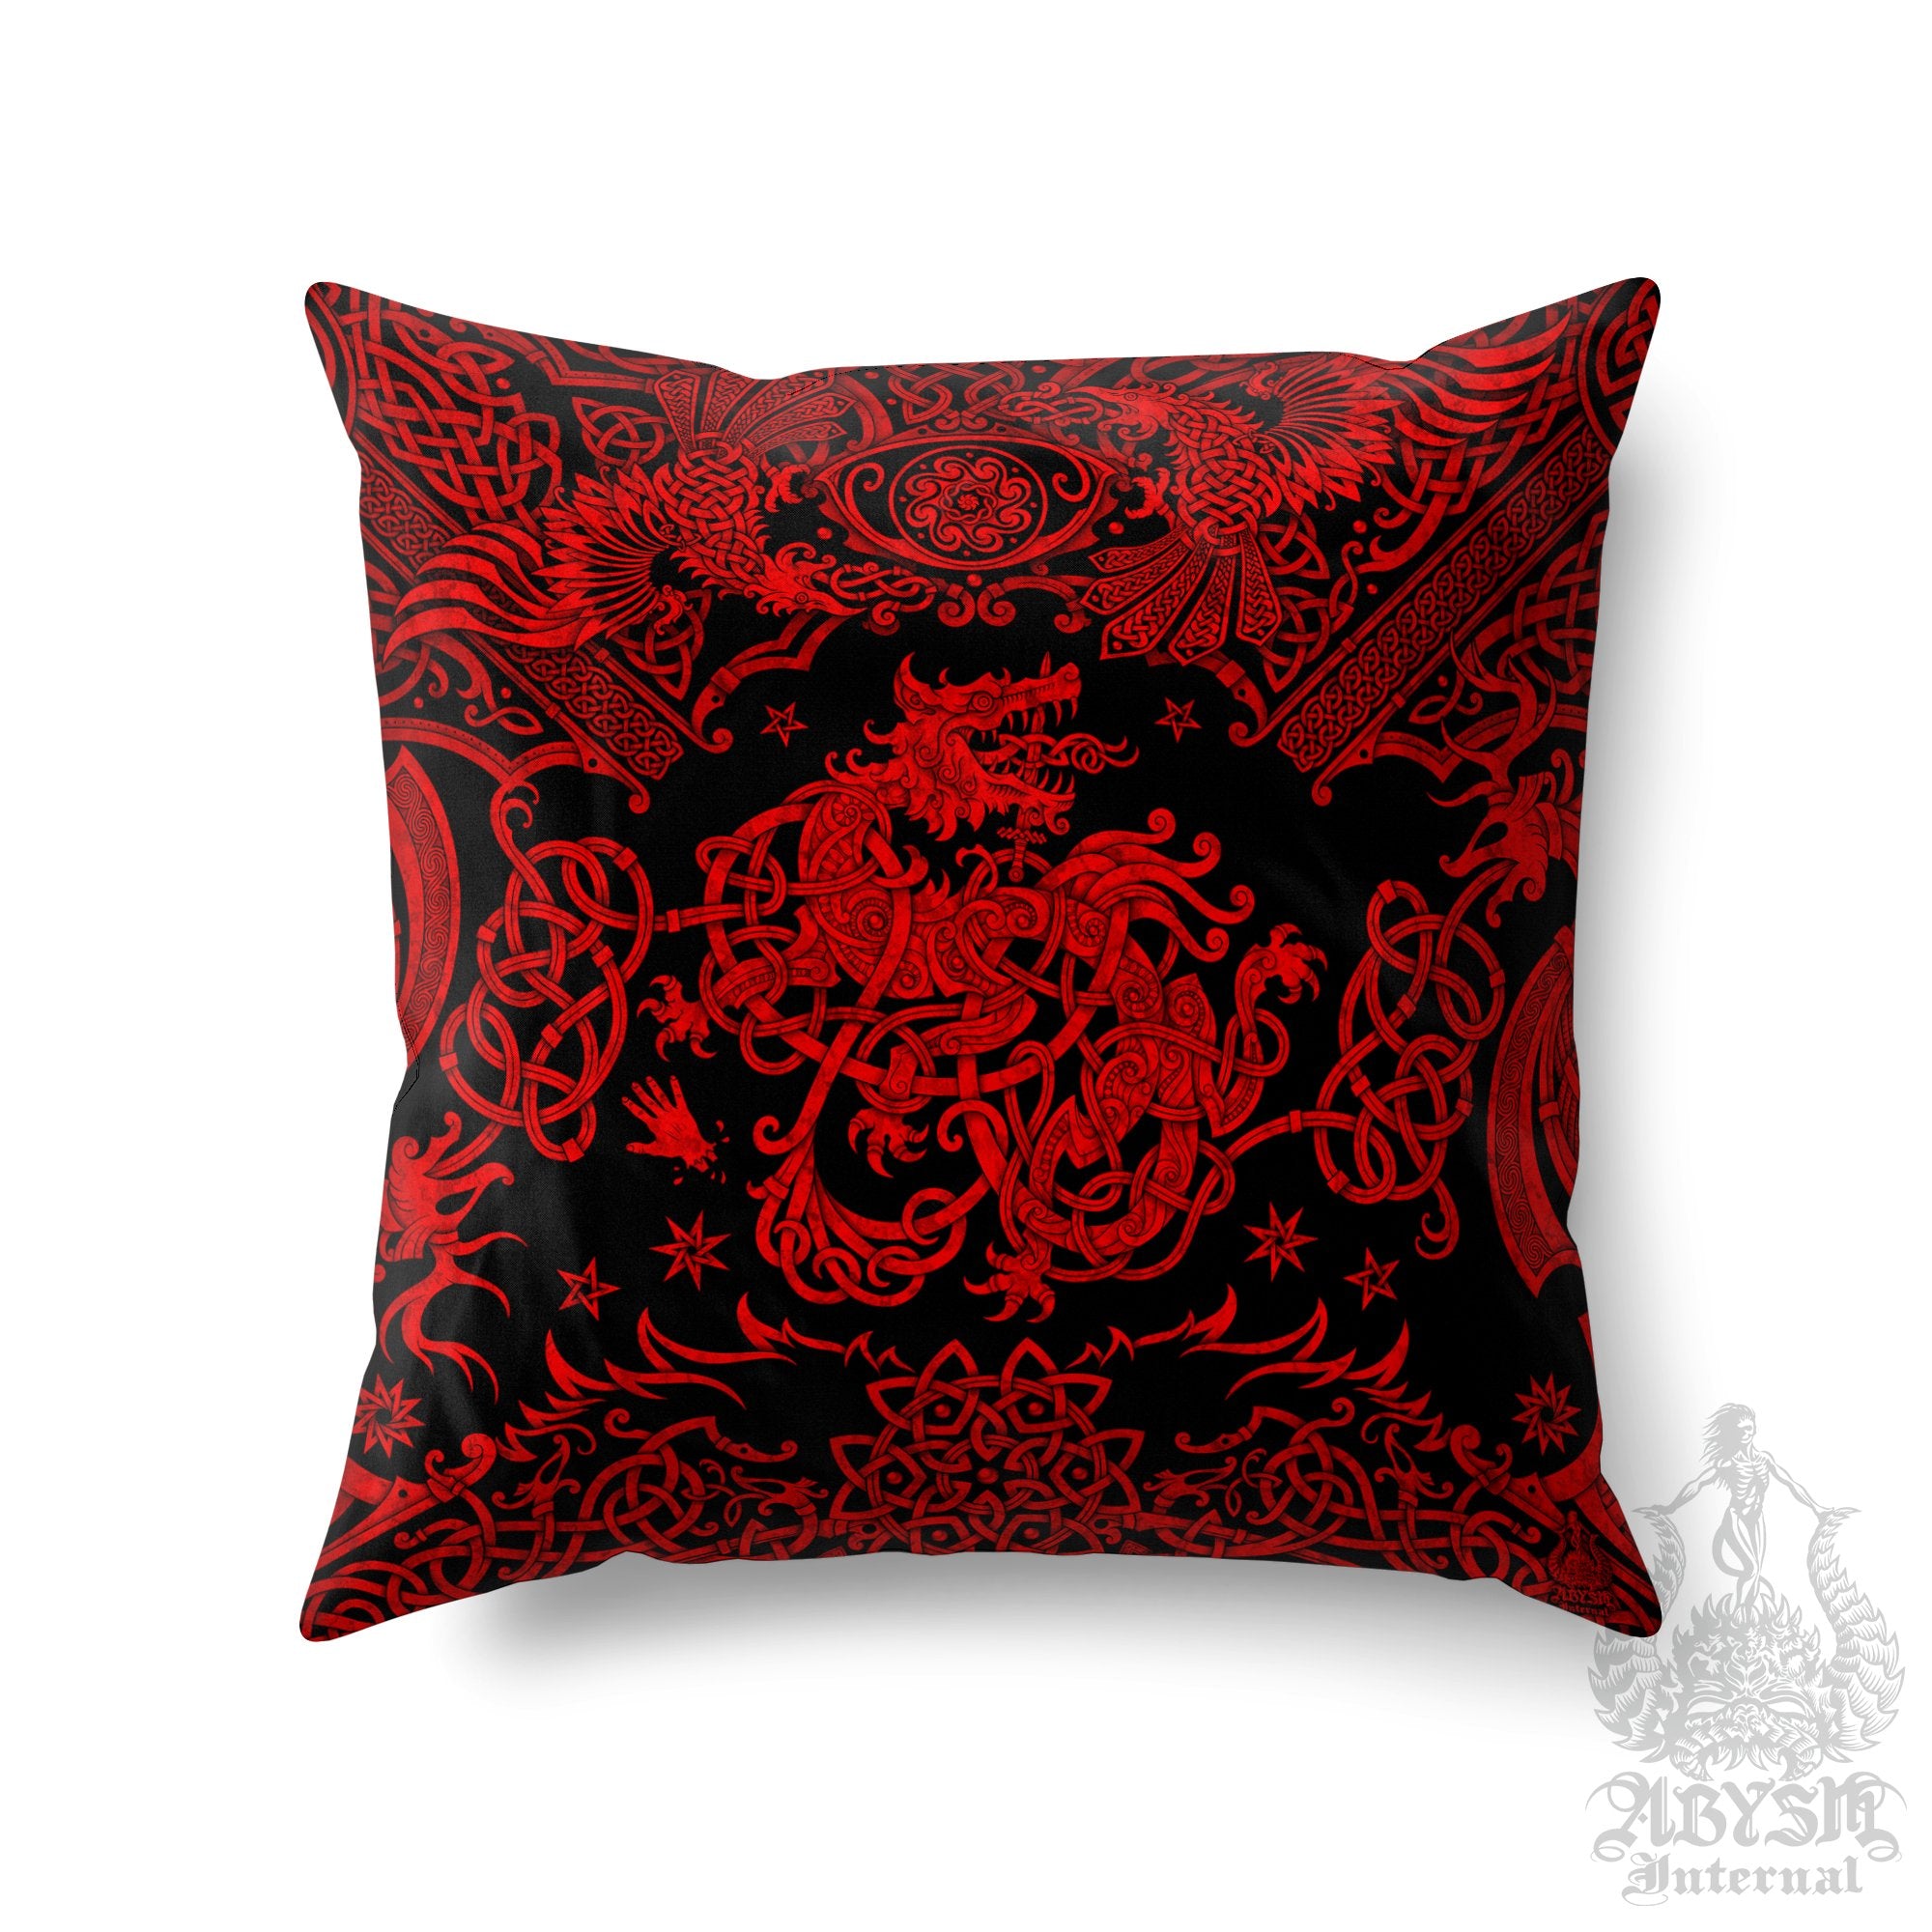 Viking Wolf Throw Pillow, Decorative Accent Pillow, Square Cushion Cover, Norse Room Decor, Fenrir Knotwork, Nordic Art, Alternative Home - Black and Red - Abysm Internal